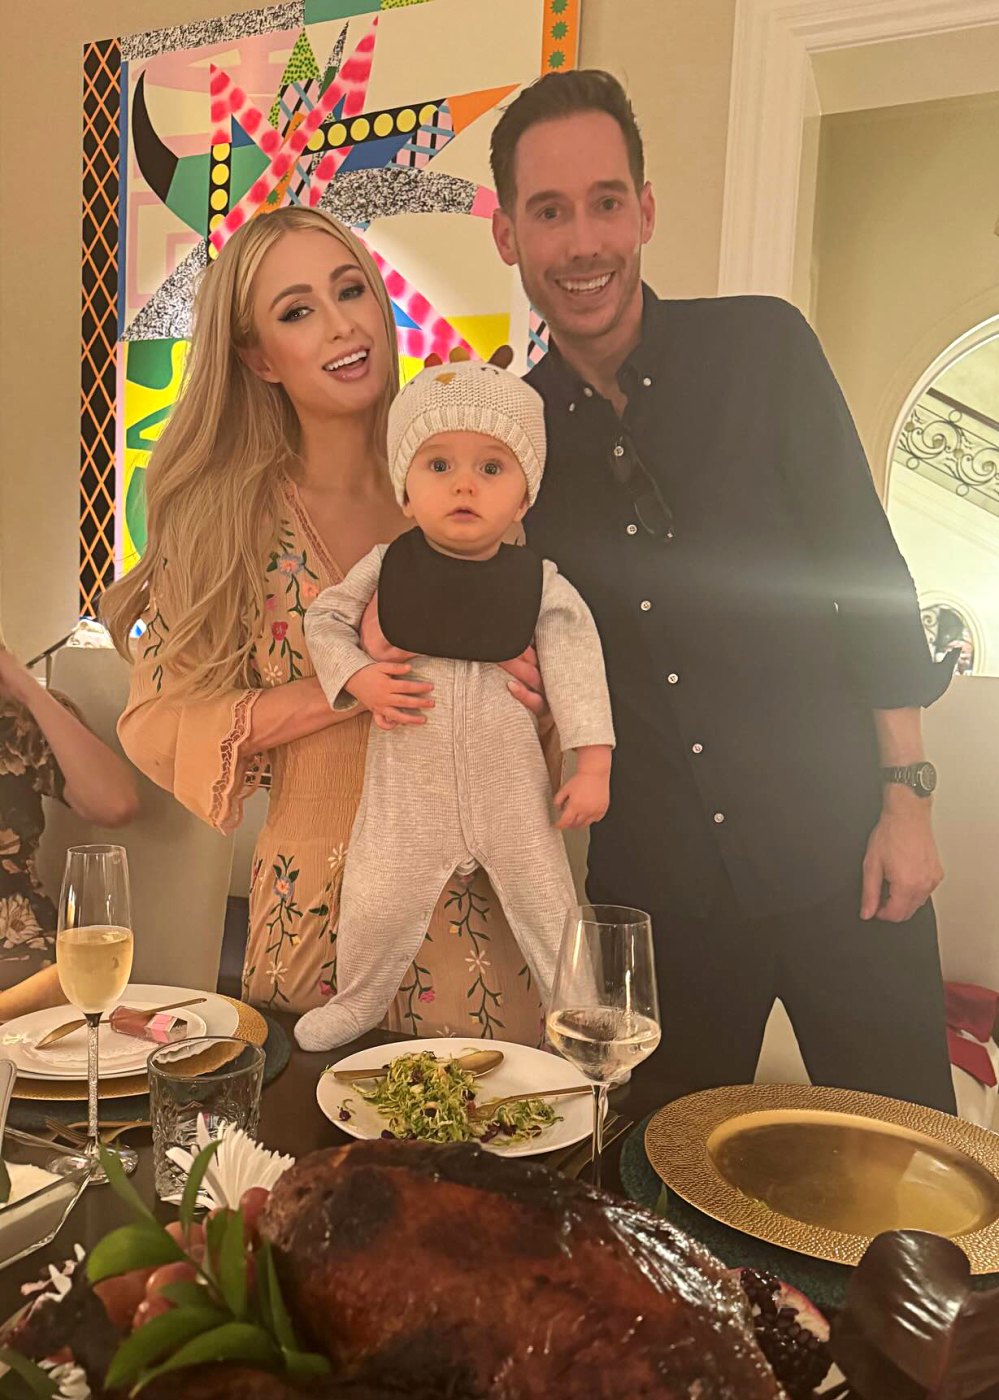 Paris Hilton ‘Can’t Wait to Celebrate’ Christmas With 2 Kids After Welcoming Daughter London